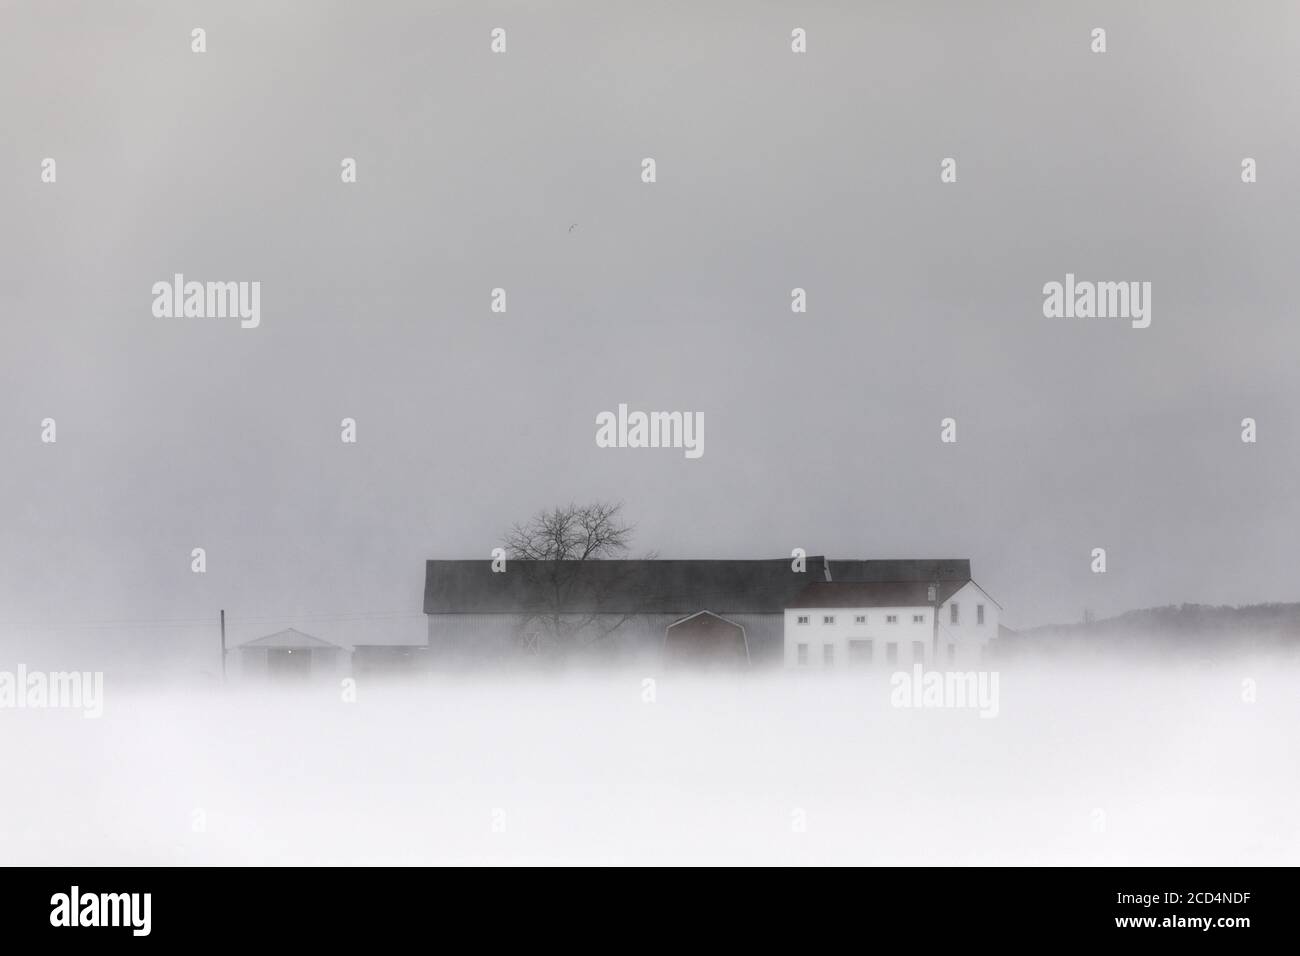 Mohawk Valley, New York State: Cold and blowing snow at an Amish farm. Stock Photo